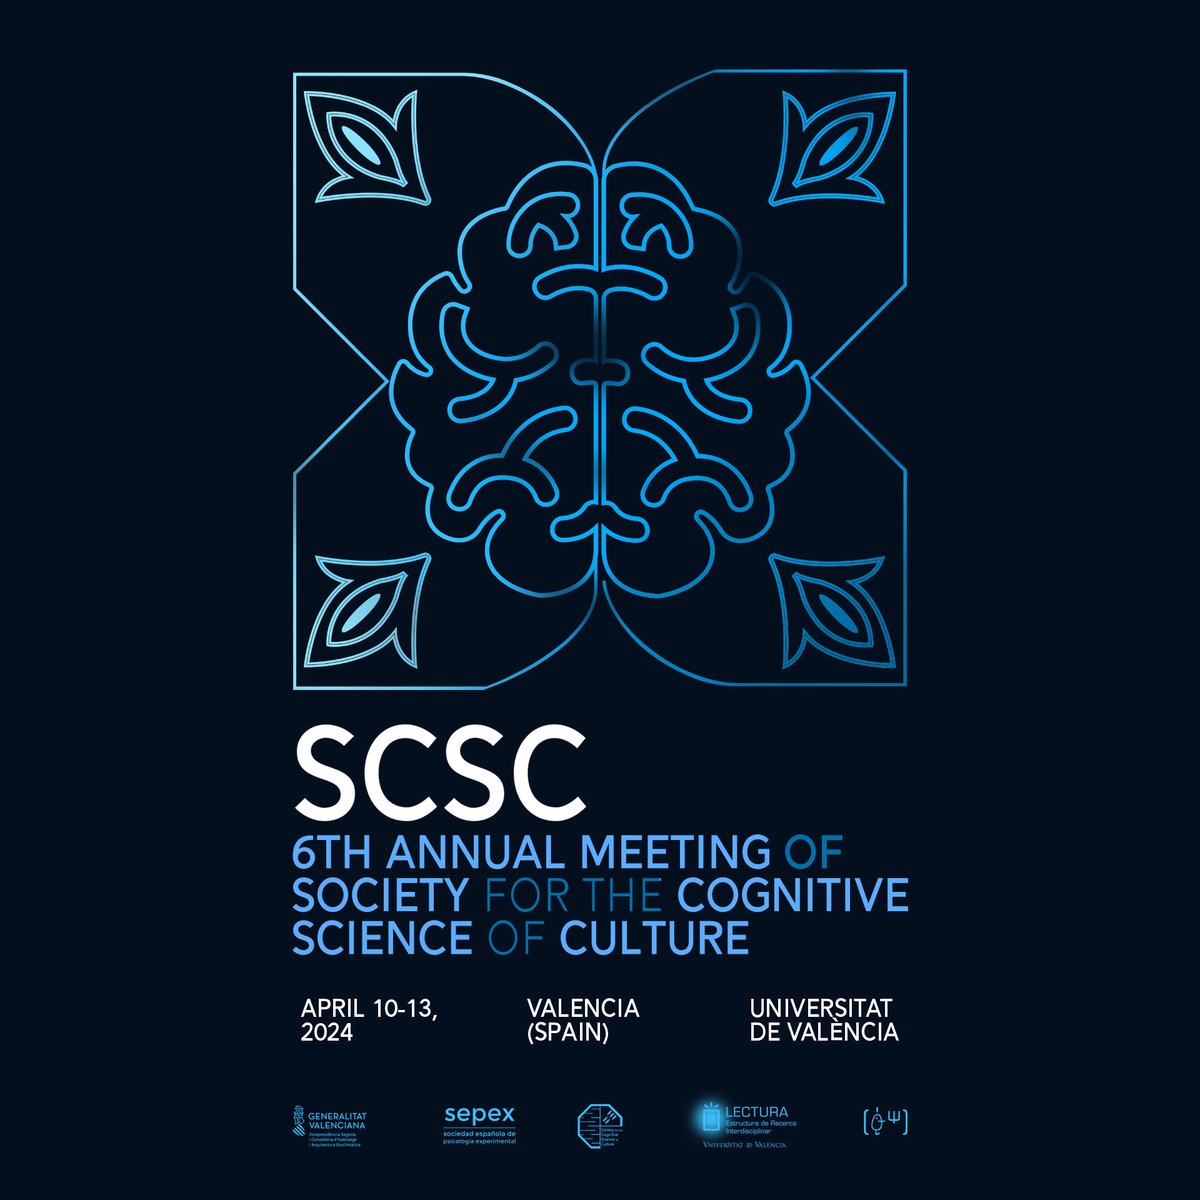 Heads up! The abstract submission for the Sixth Annual Meeting of the Society for the Cognitive Science of Culture closes on February 7th. Come with us to explore the connections between language, culture, cognition and thought. esdeveniments.uv.es/107864/detail/…